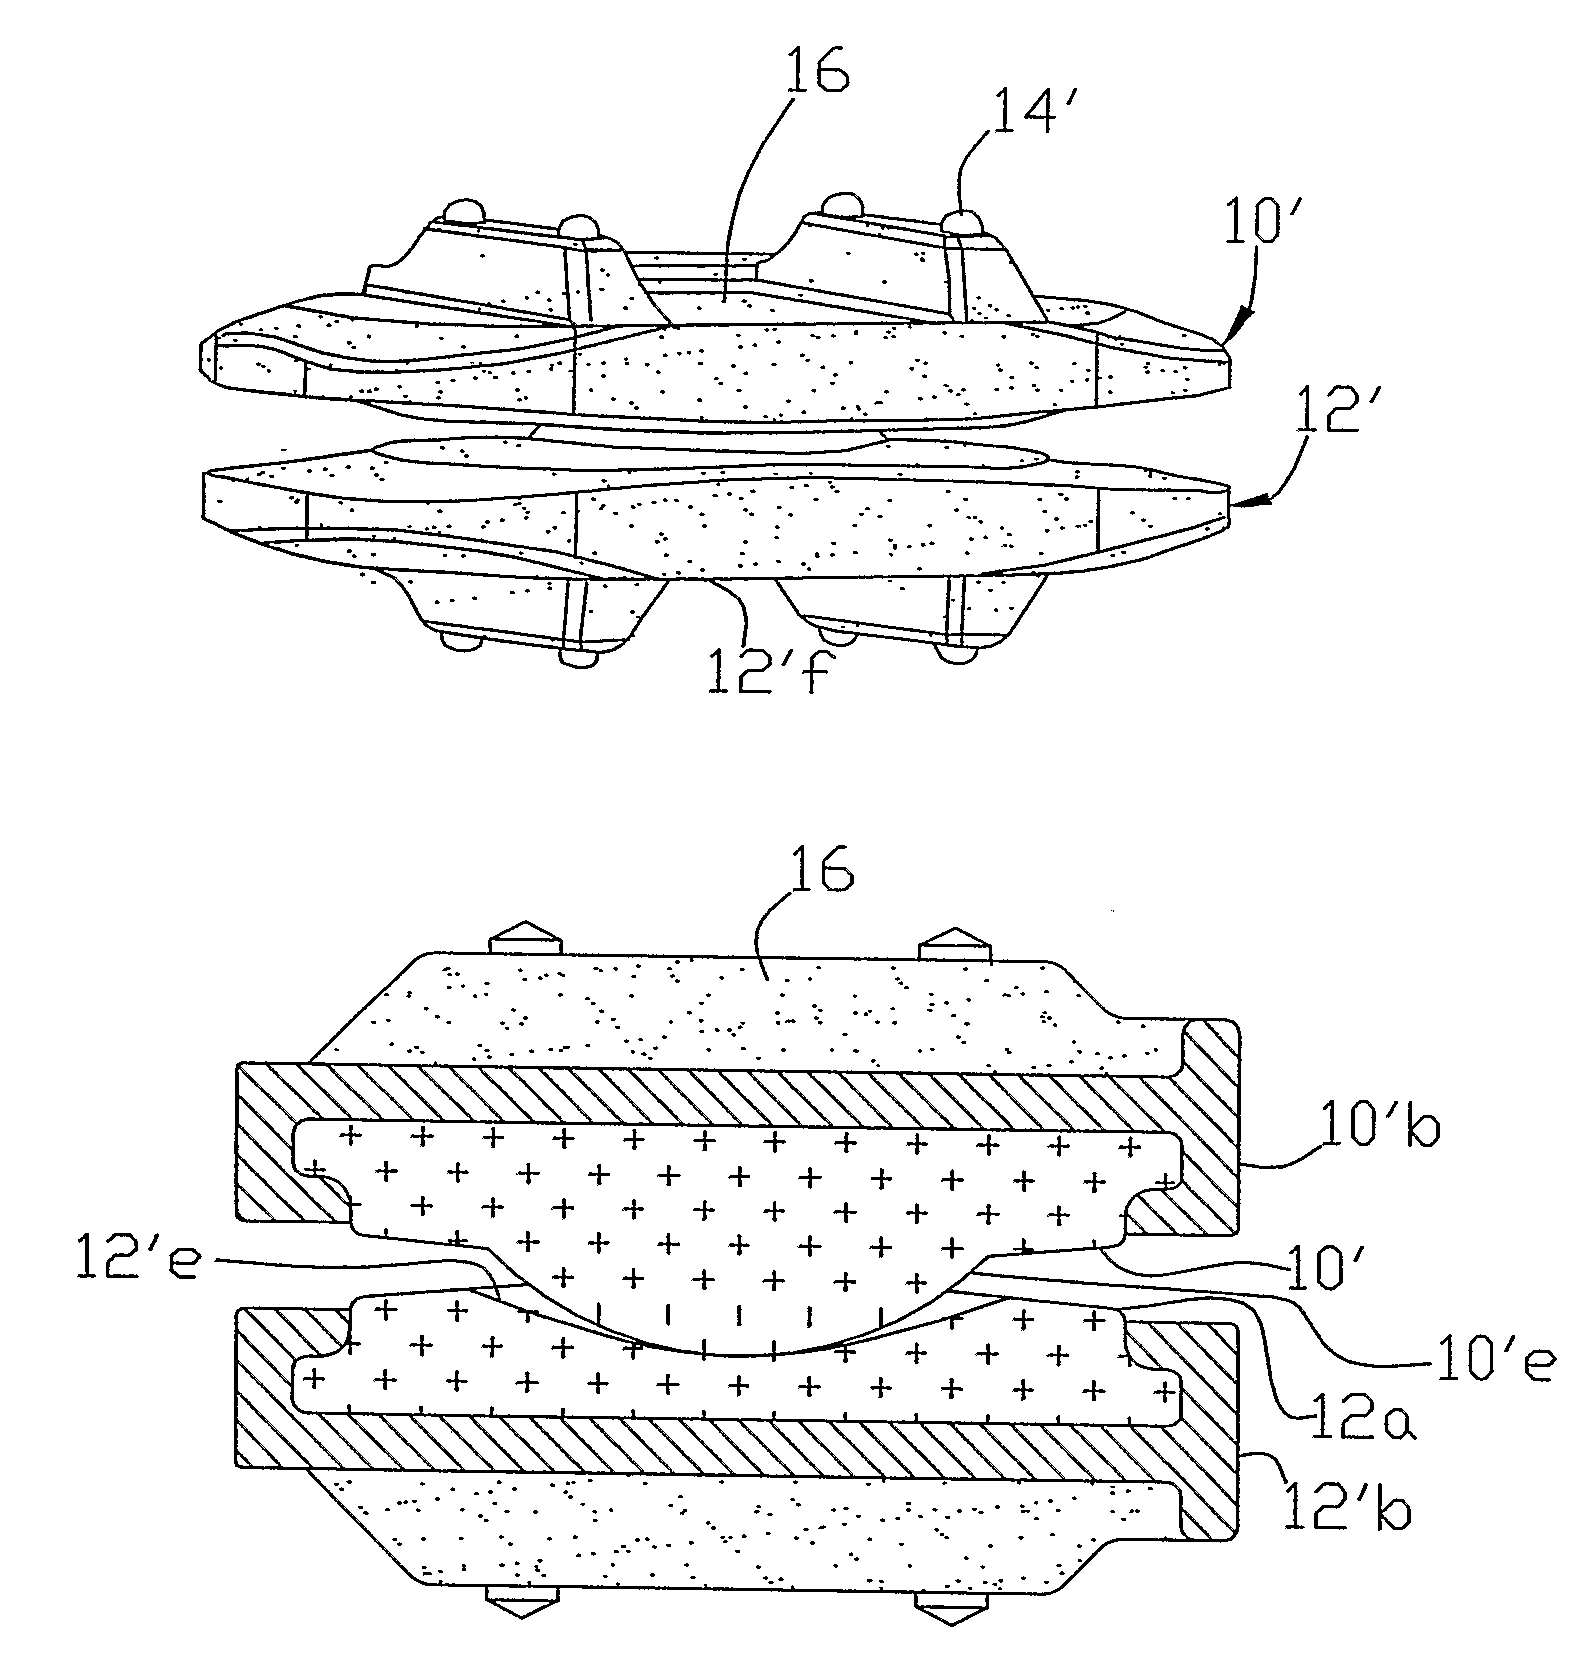 Prosthesis for restoring motion in an appendage or spinal joint and an intervertebral spacer